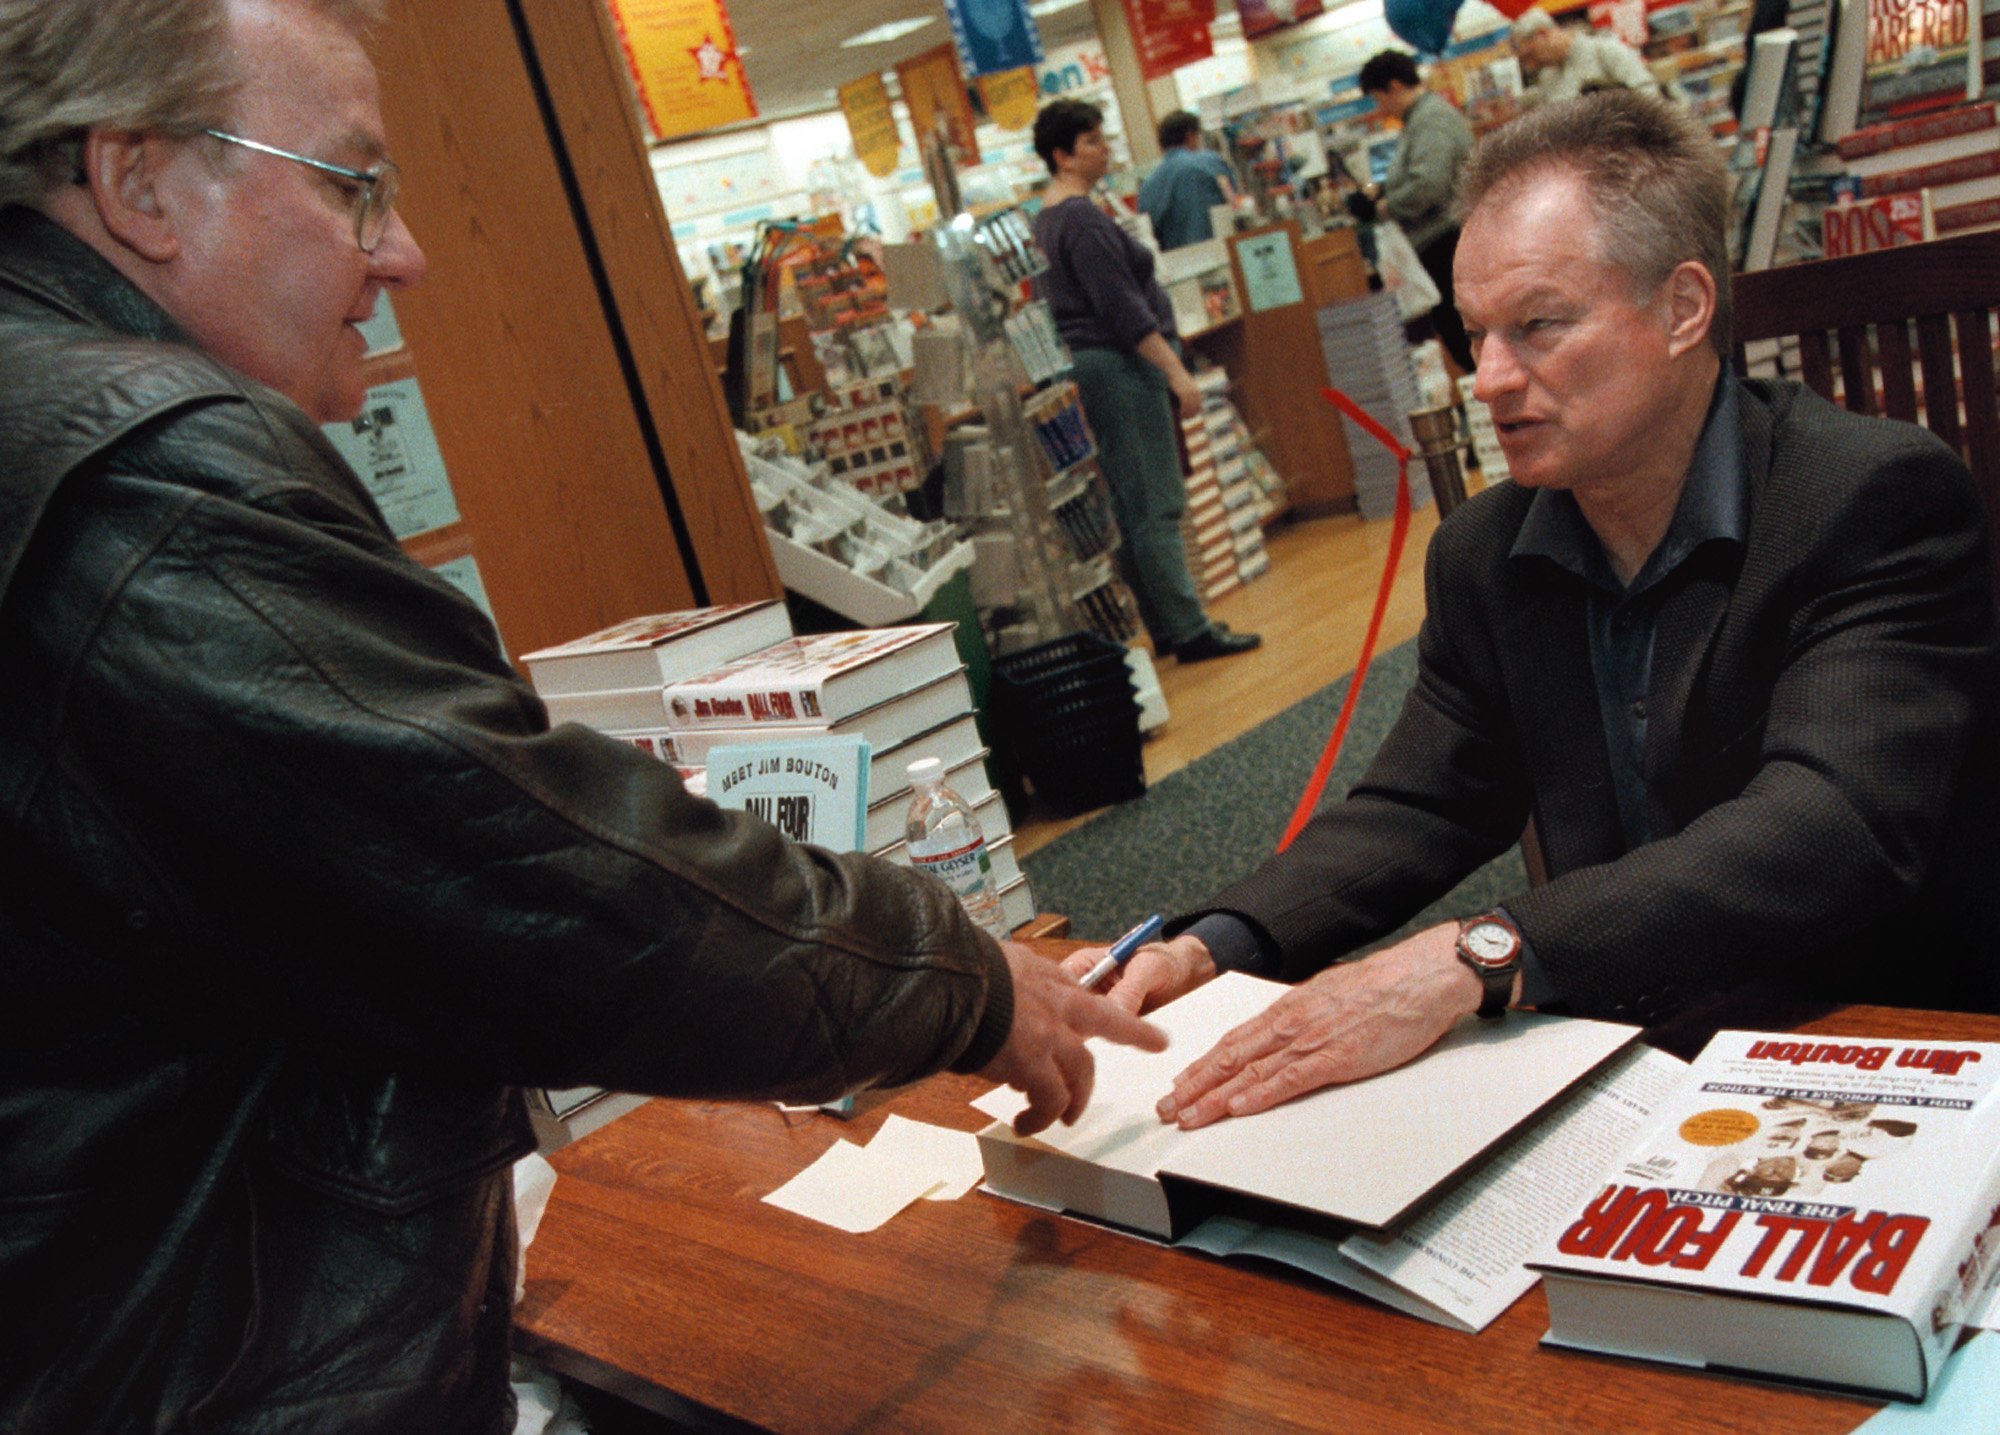 Former New York Yankees pitcher Jim Bouton signs copies of his new book, "Ball Four: The Final Pitch" at a Waldenbooks store in Schaumburg. Photo: Getty Images/GlobalImagesUkraine